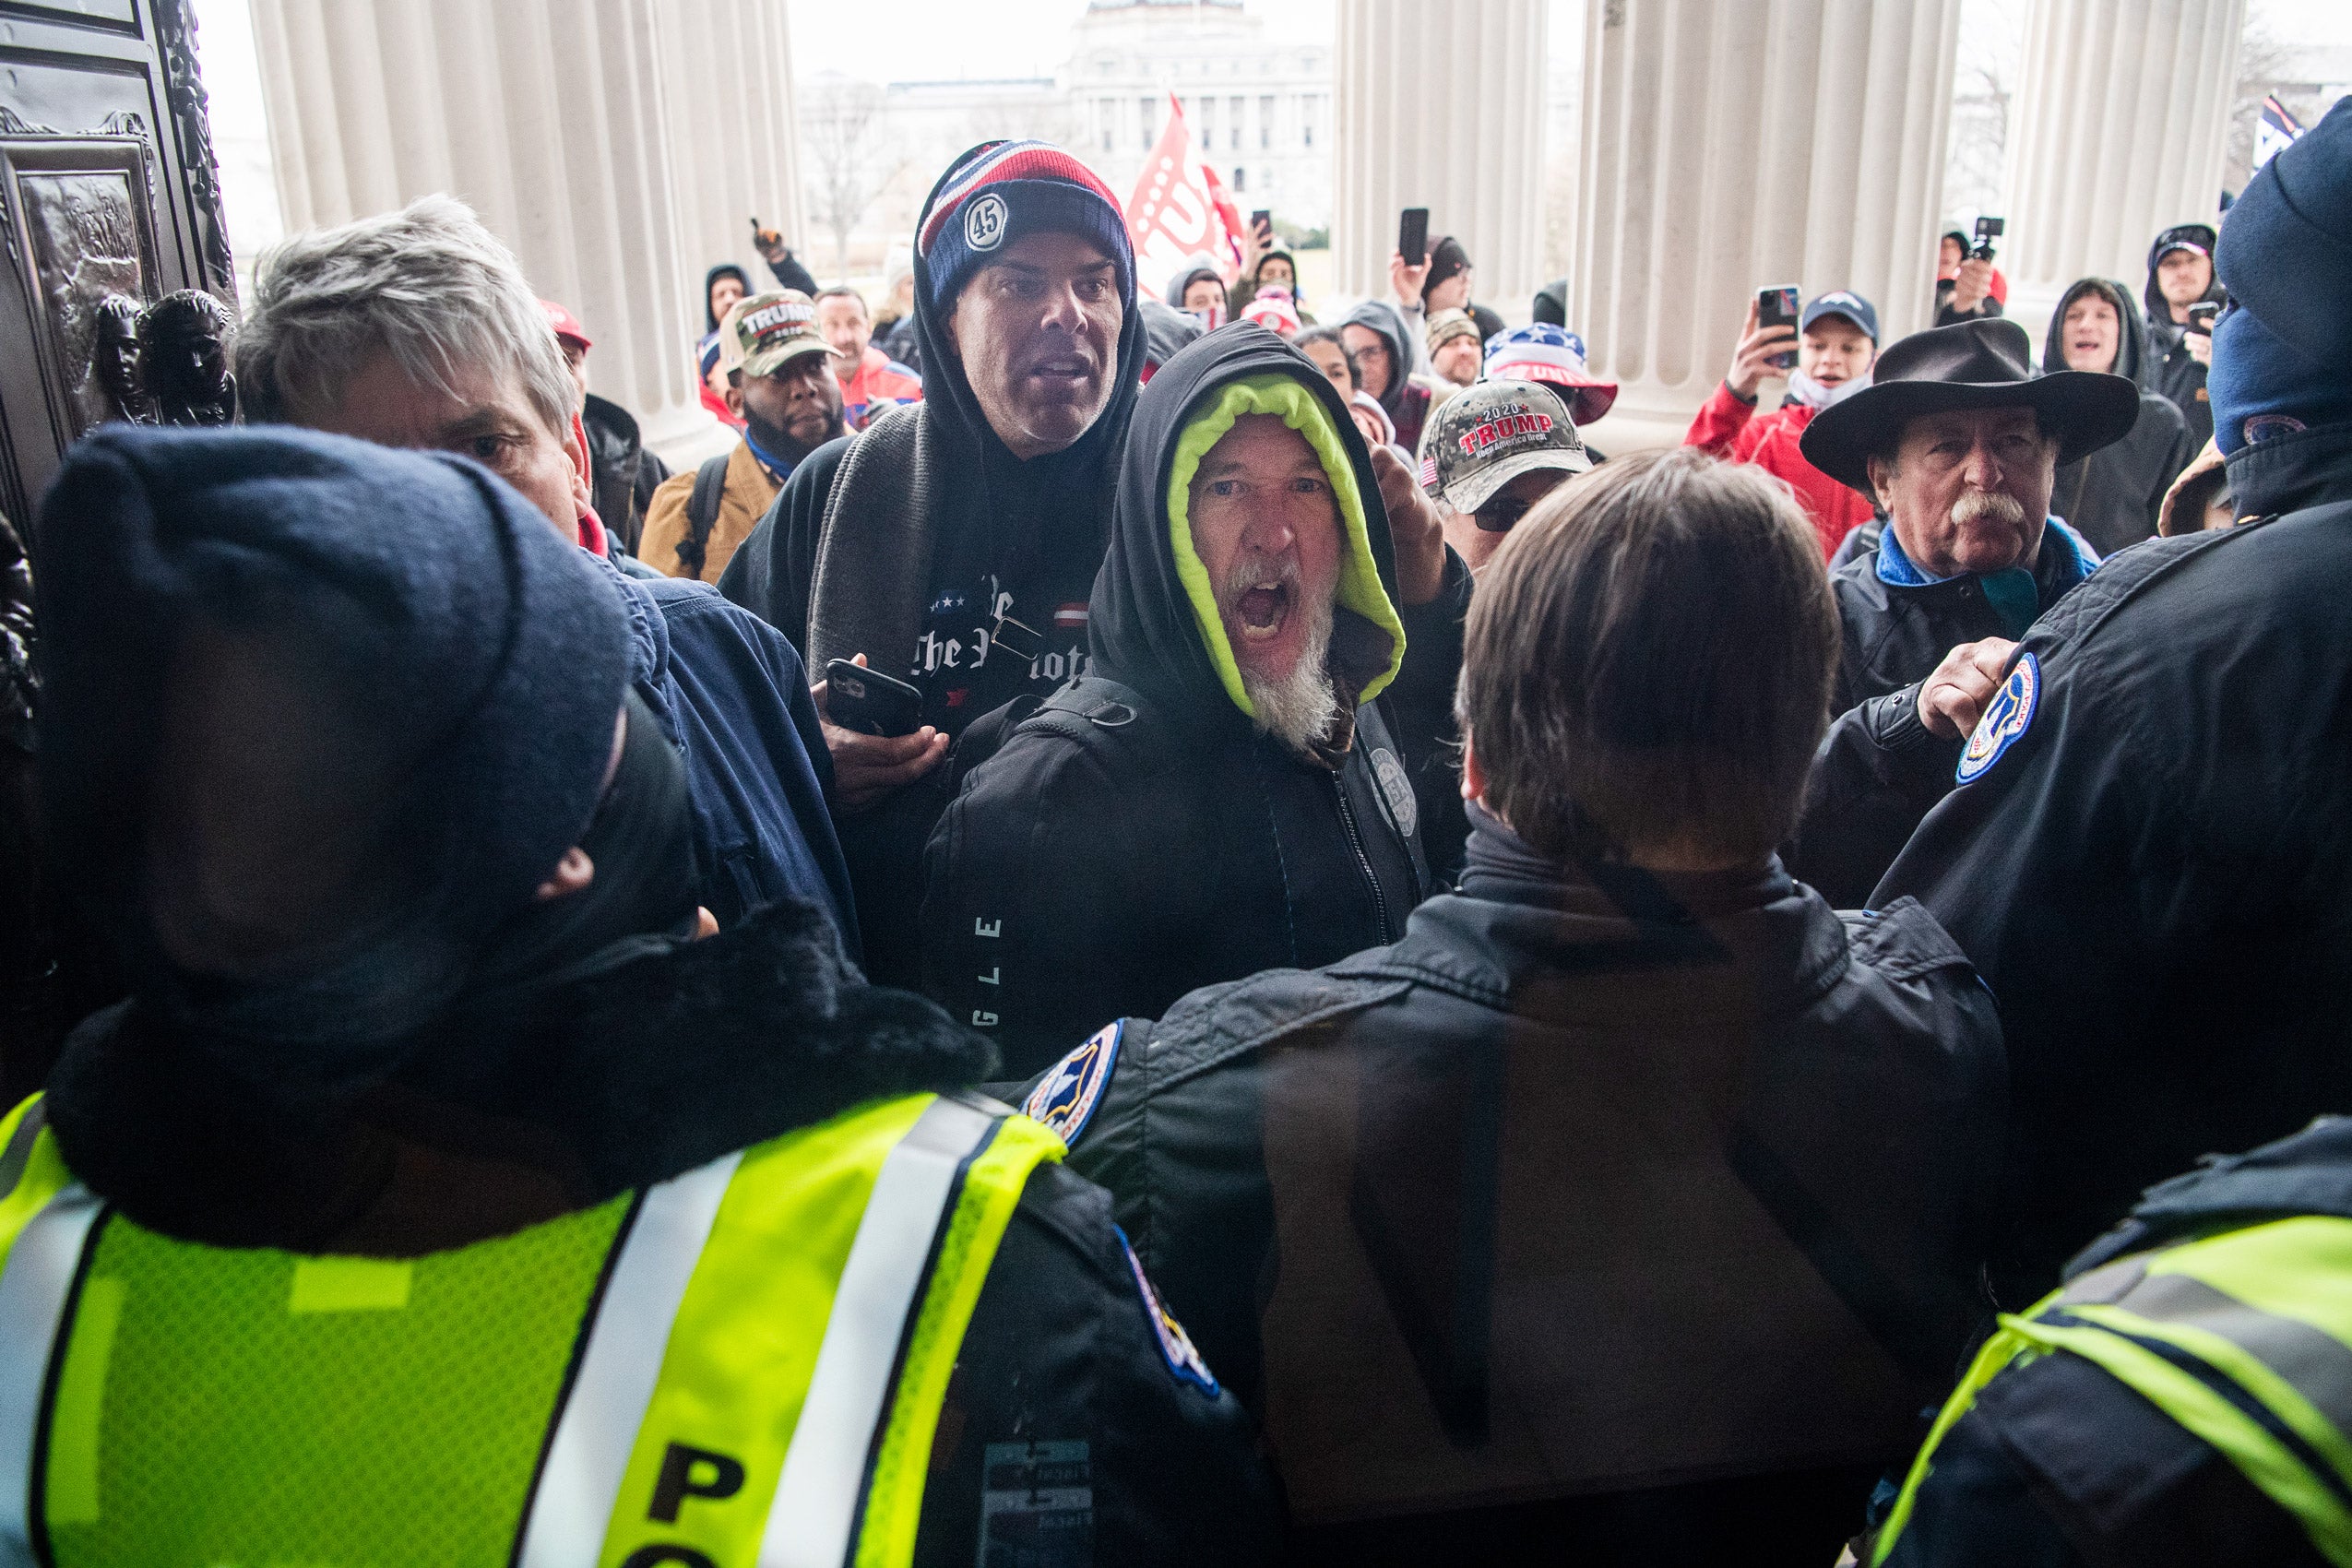 Rioters attempt to enter the U.S. Capitol at the House steps during a joint session of Congress